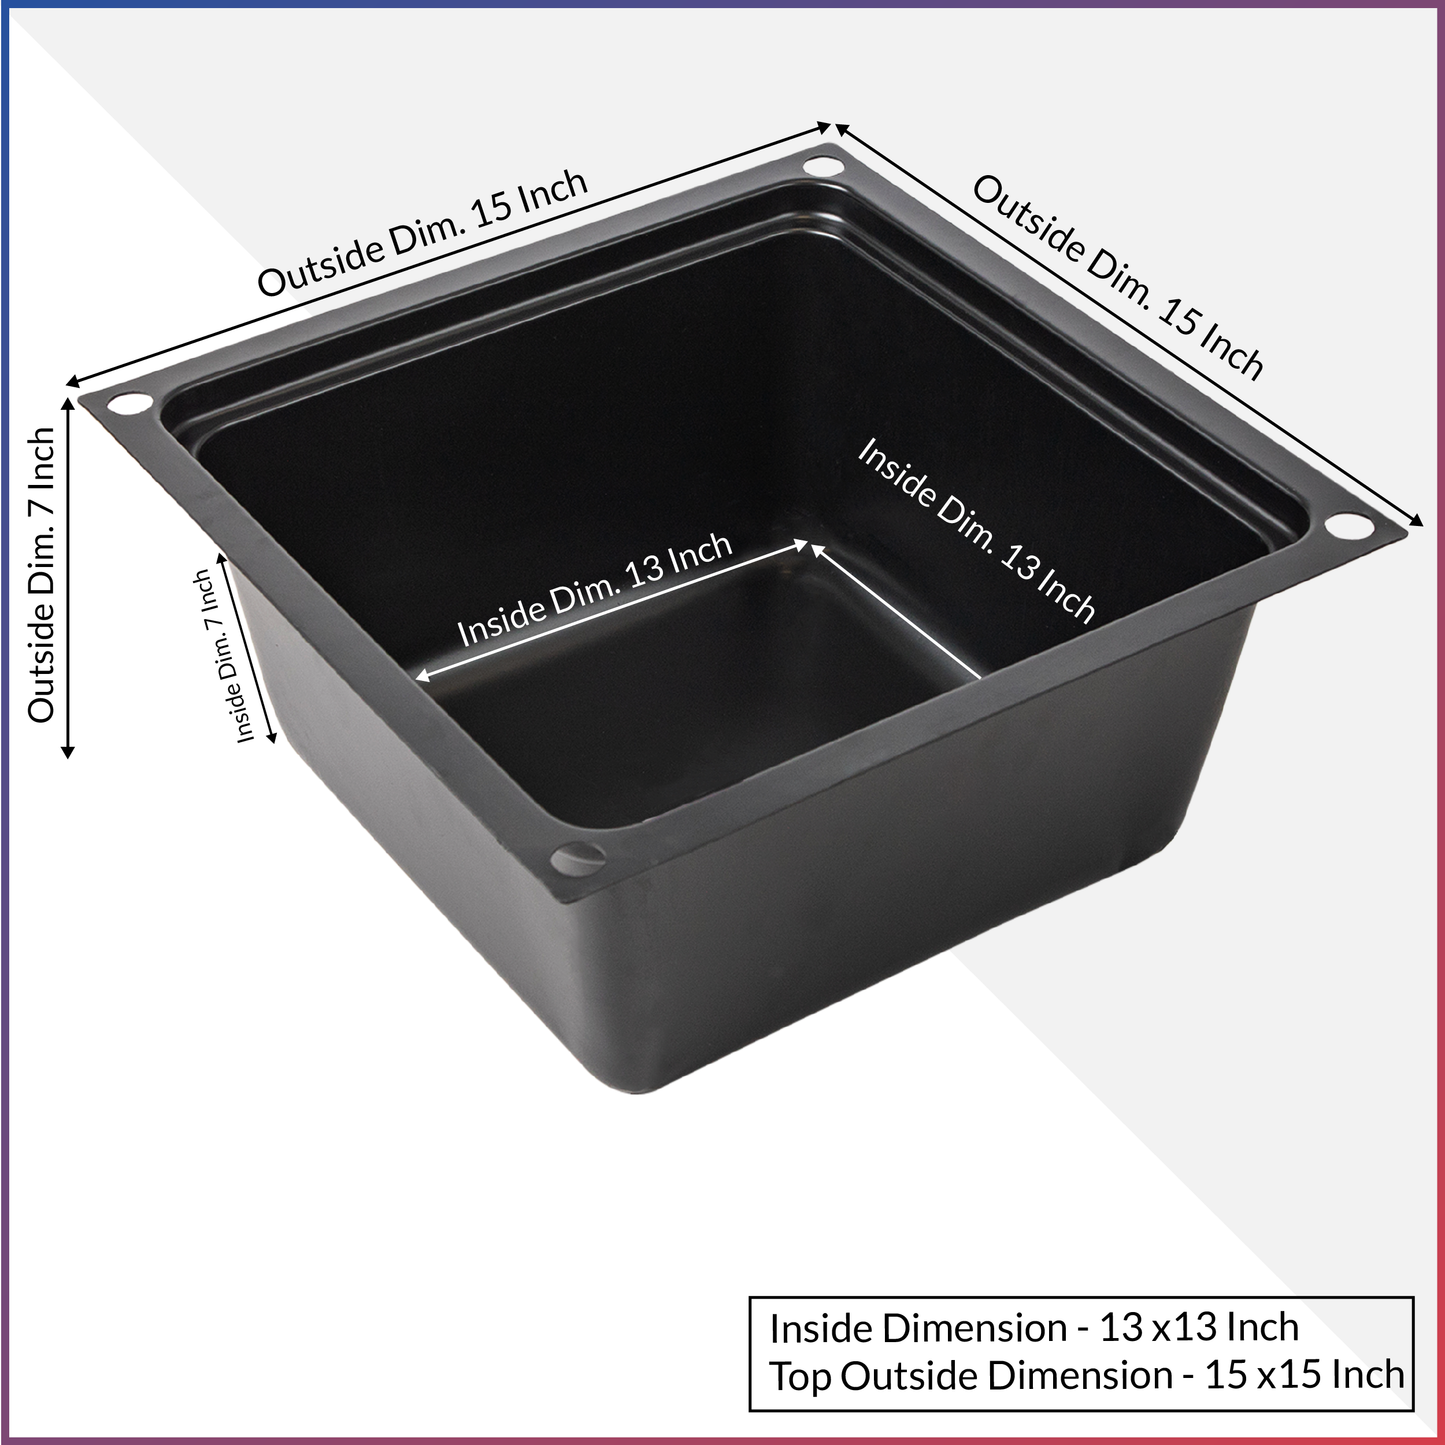 Deep Black plastic utility tub for in cavity setting or general use